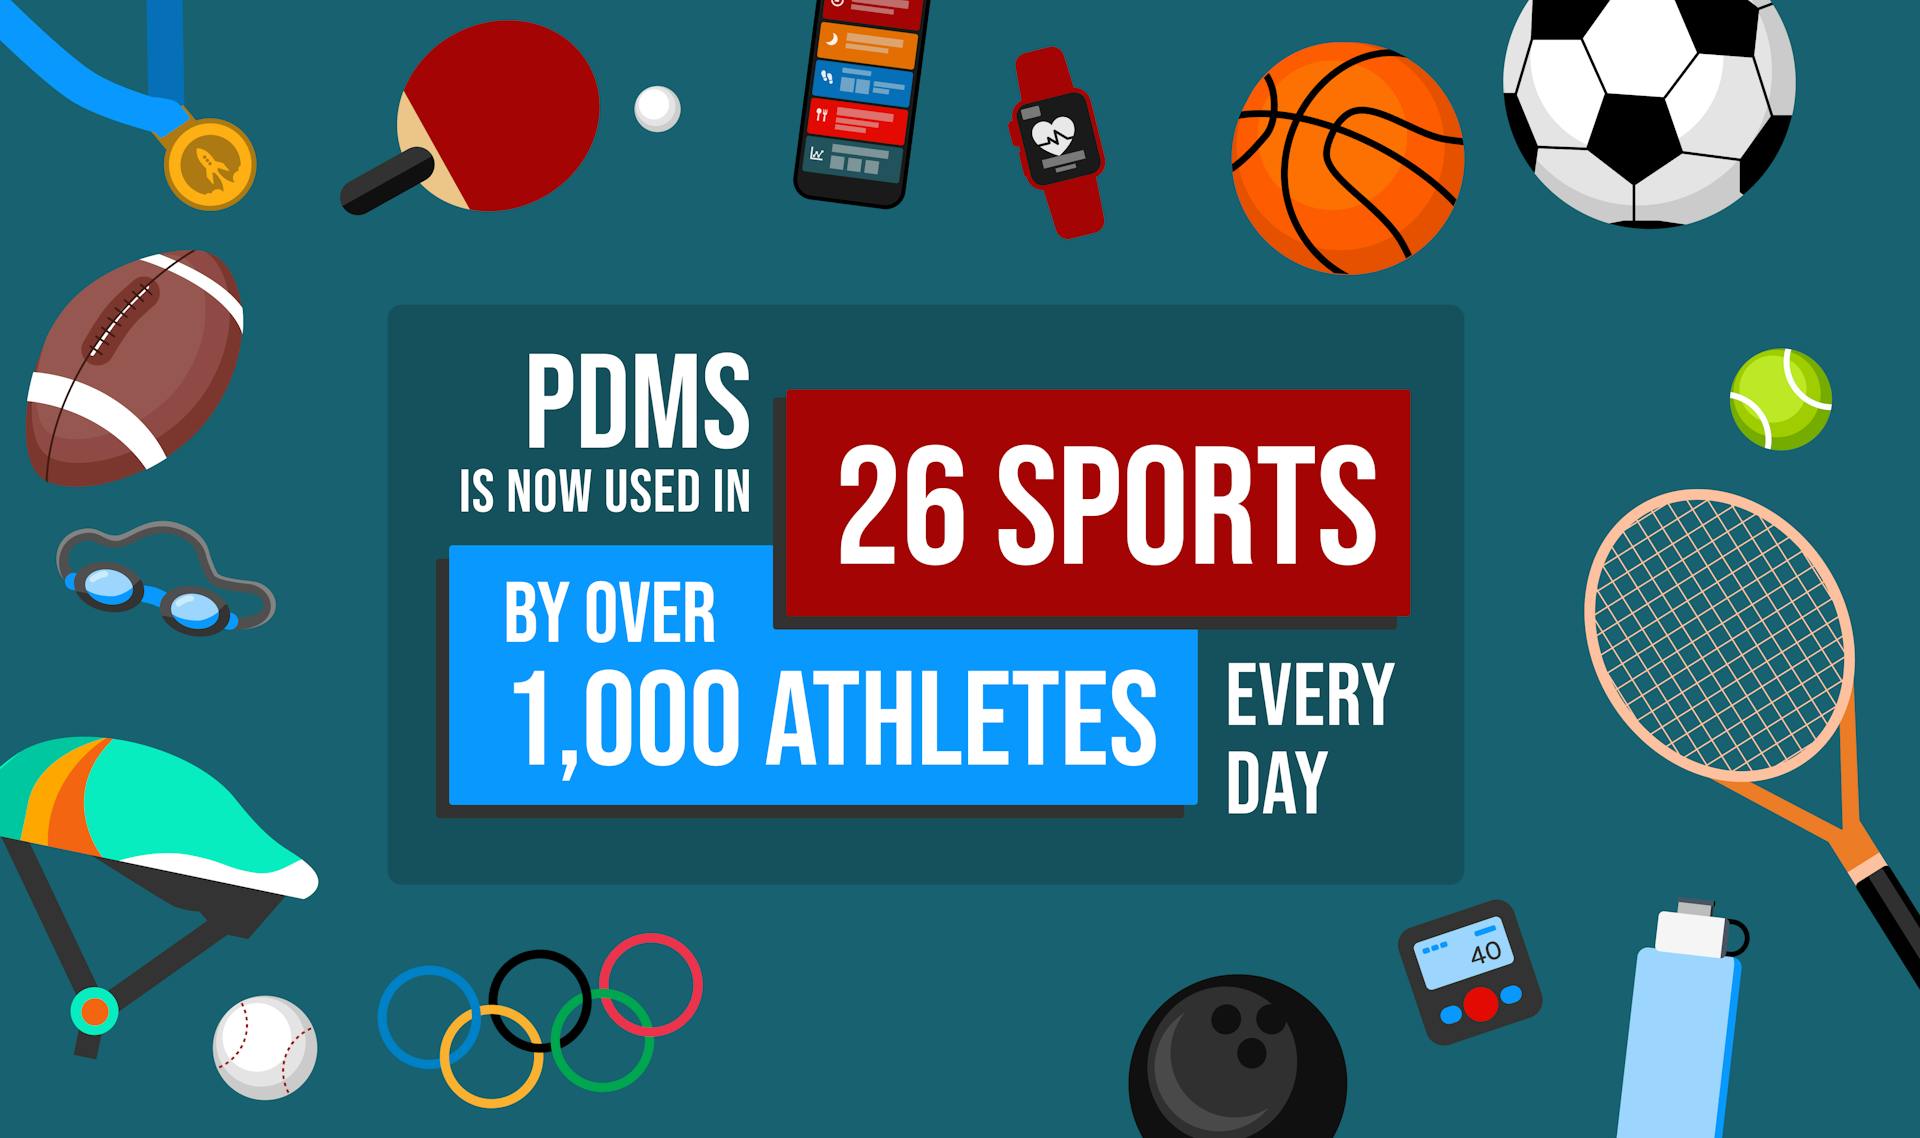 illustration showing pdms is now used in 26 sports by over 1000 athletes every day